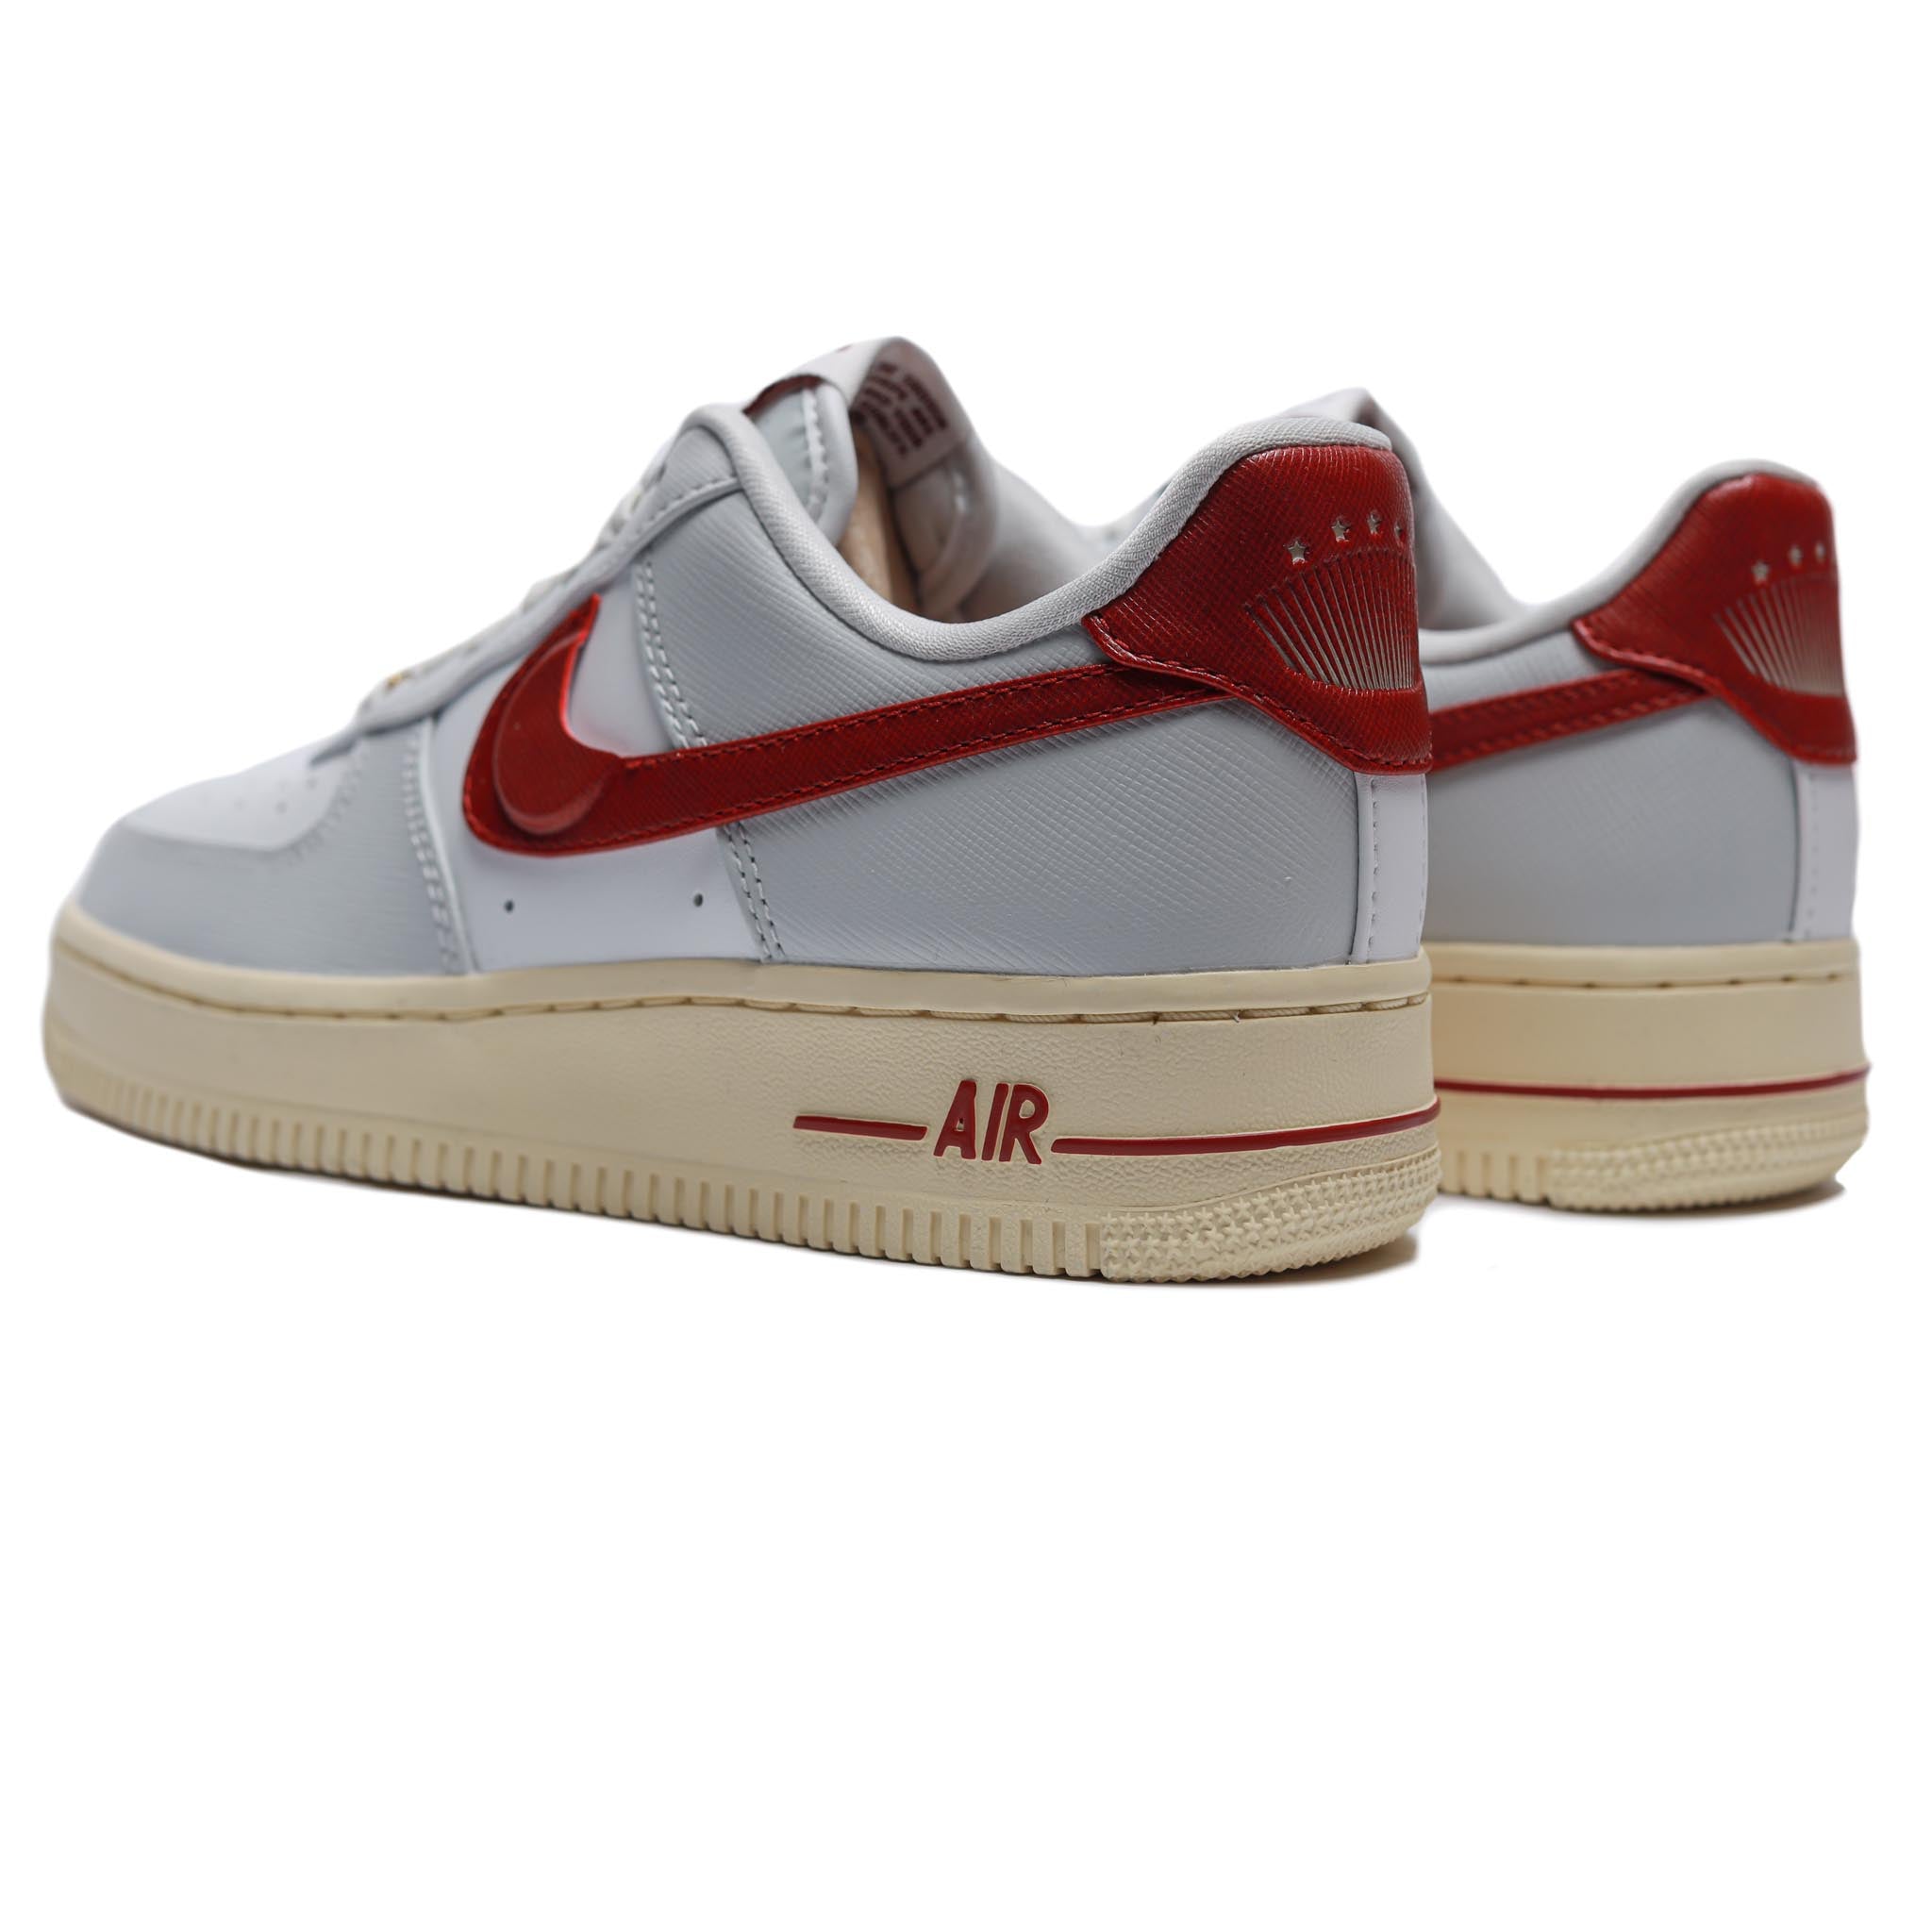 Nike Air Force 1 Low '07 SE 'Just Do It' Photon Dust/Team Red